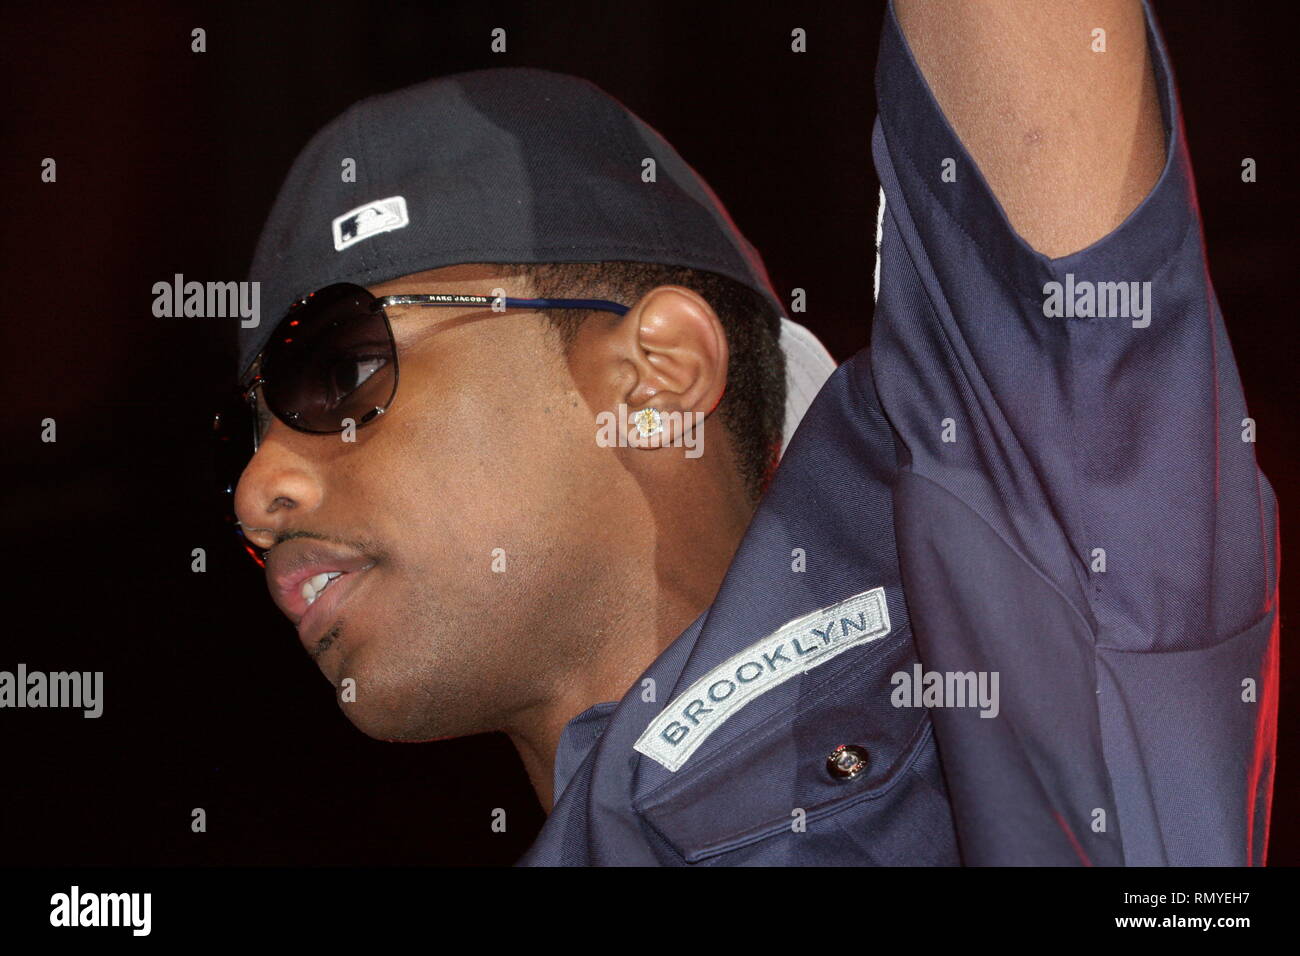 Rapper John Jackson,better known by his stage name Fabolous is shown performing during his concert appearance at the Hot Jam 6 concert event held at the Hartford Civic Center in Hartford, Connecticut on Friday June 1, 2007. Stock Photo